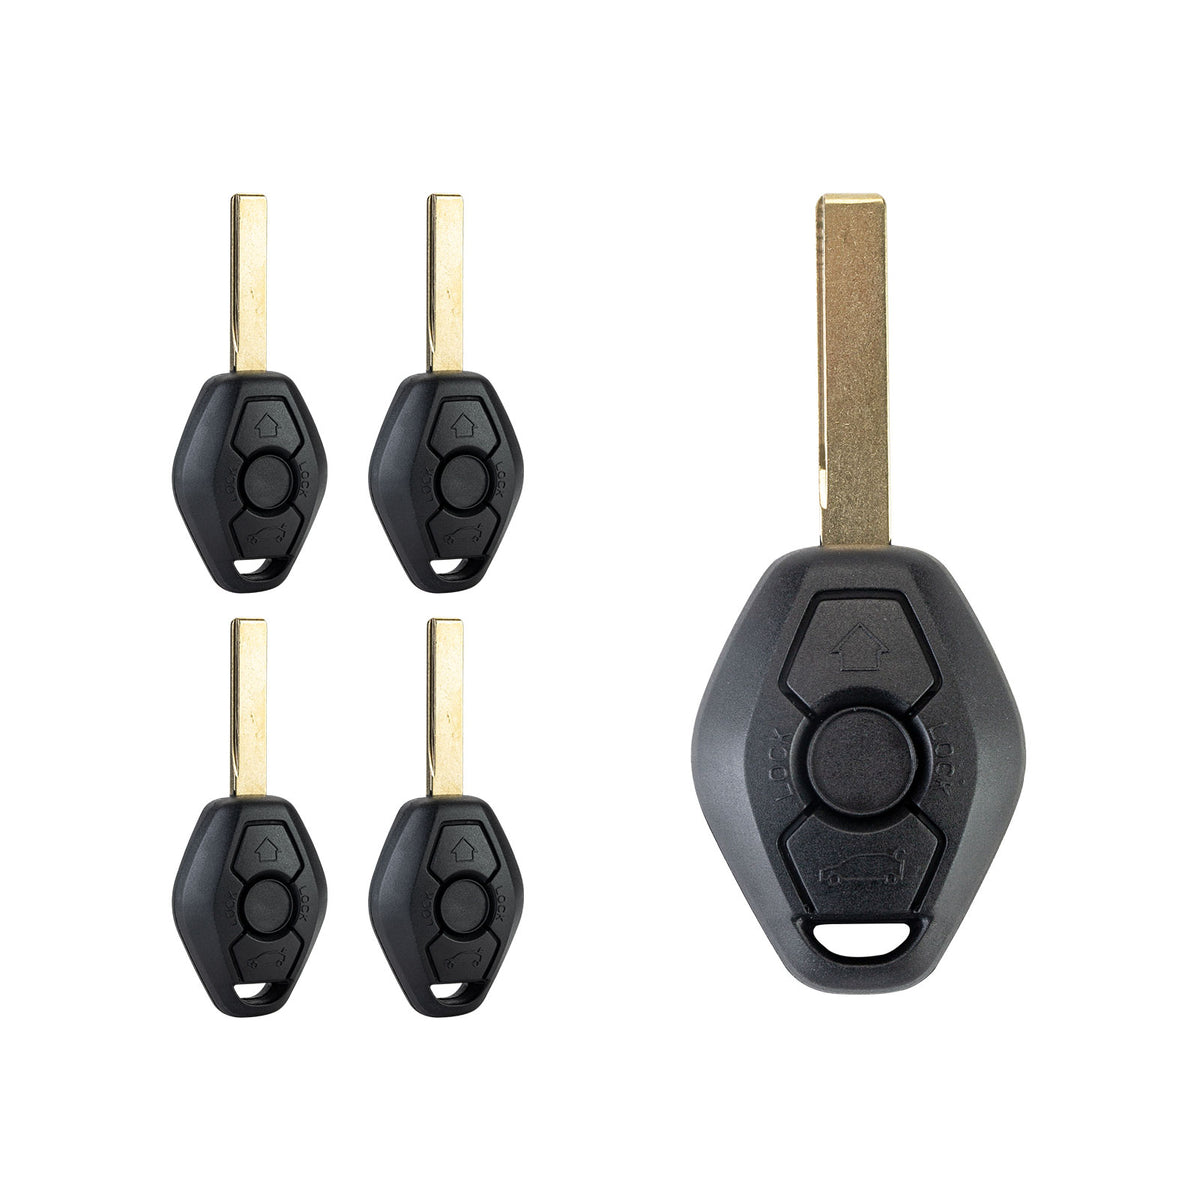 Lots of 5 Extra-Partss Remote Car Key Fob Replacement for BMW LX8 FZV fits 2001 2002 2003 525i 530i 540i HU92